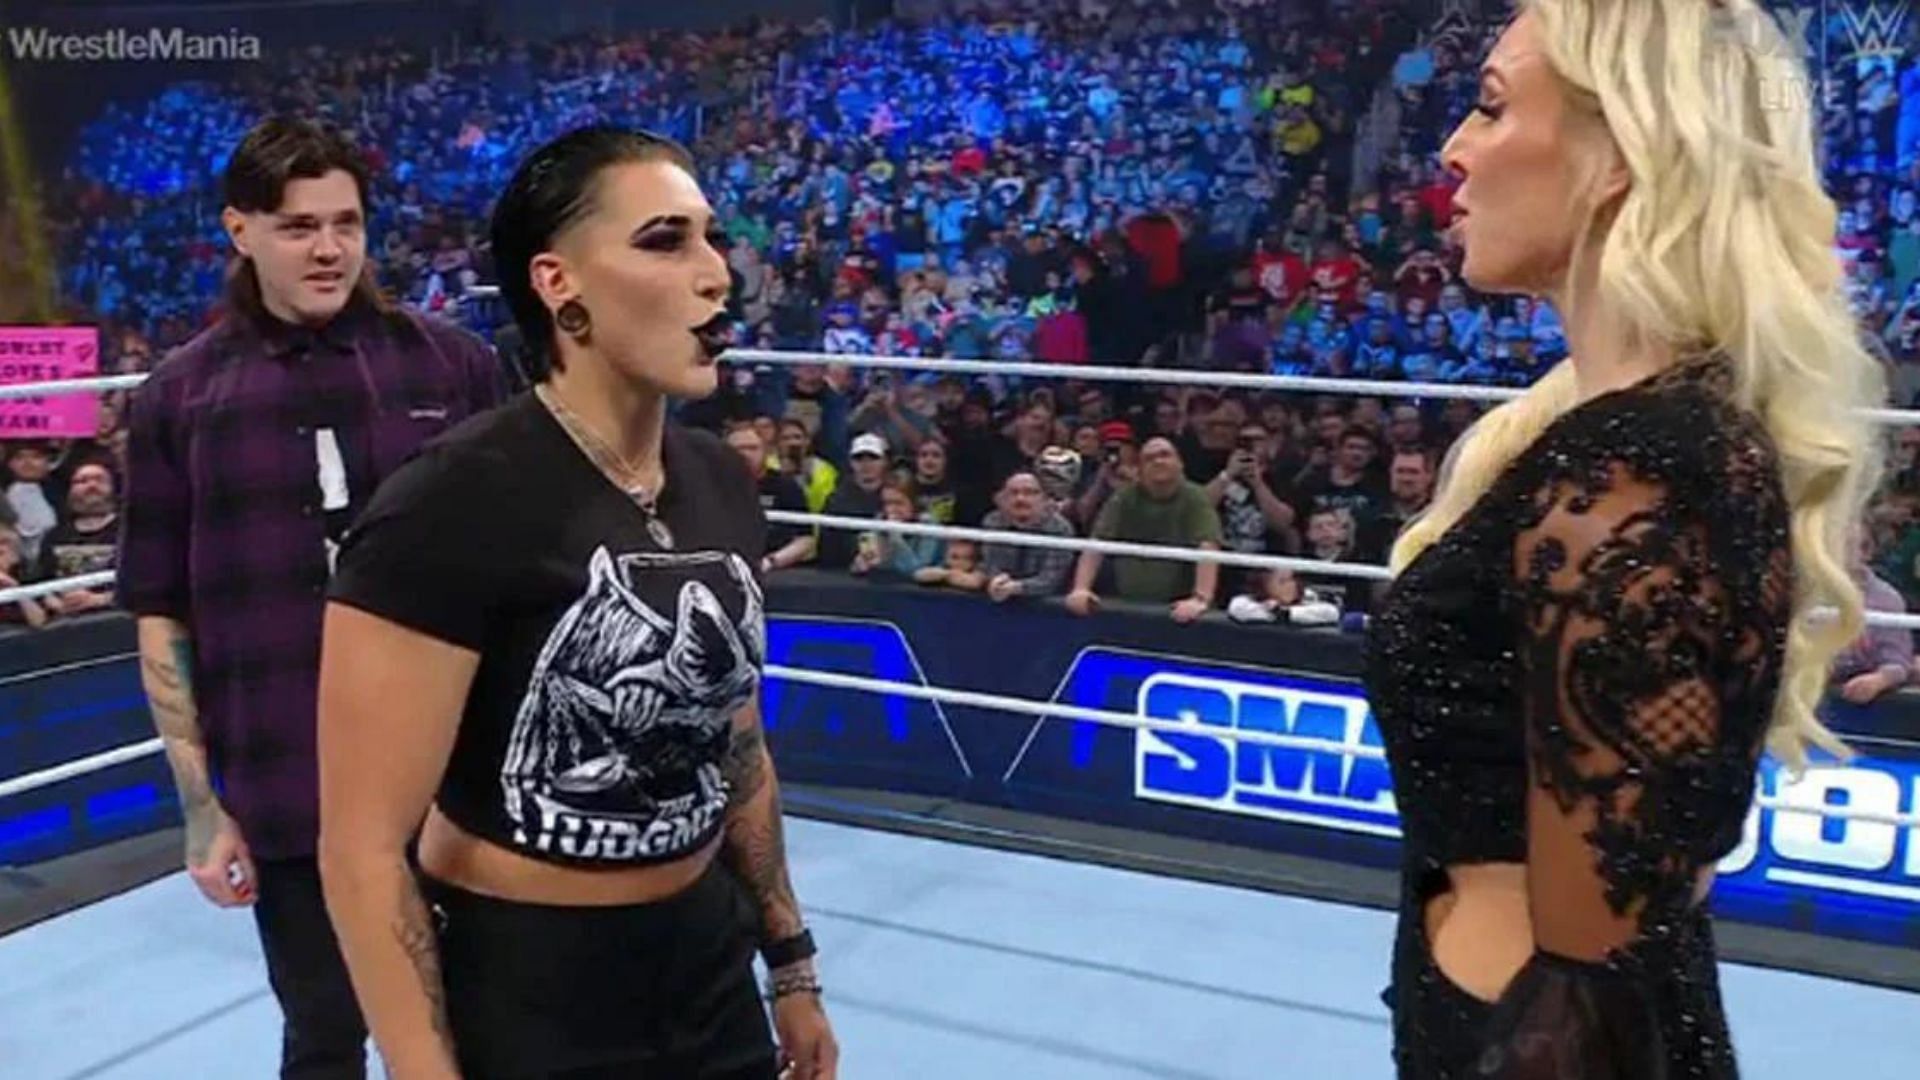 Charlotte Flair and Rhea Ripley finally came face-to-face